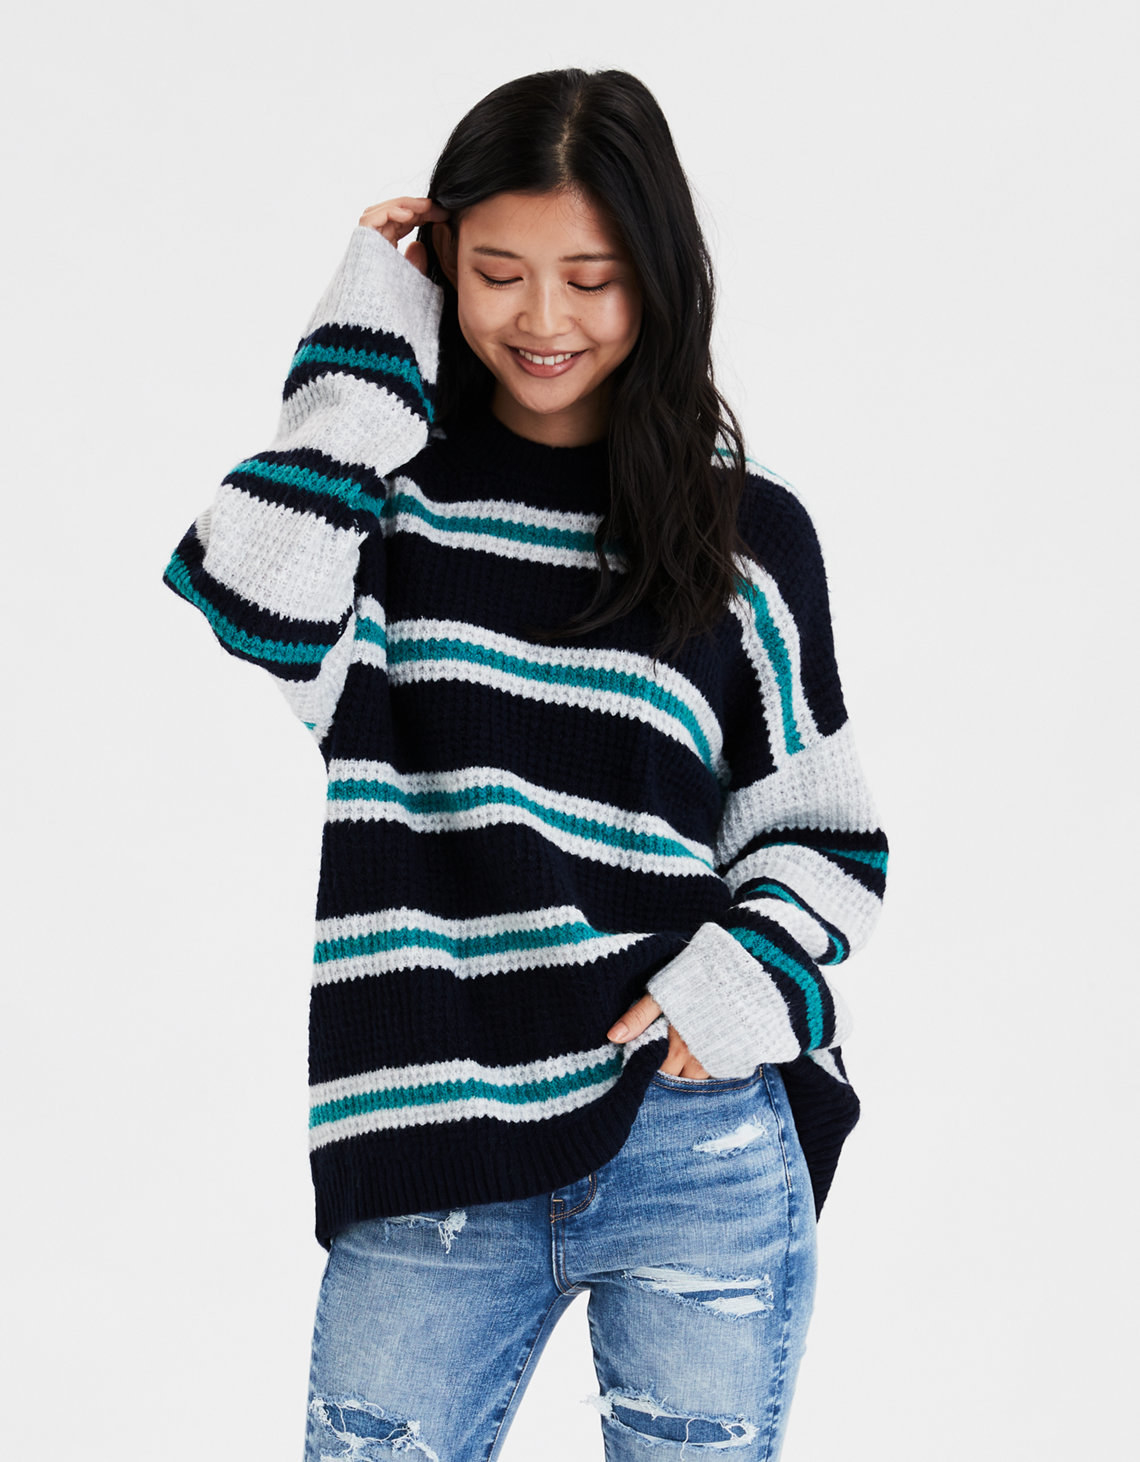 40 Sweaters Under $80 You Can Wear From Now Through Winter